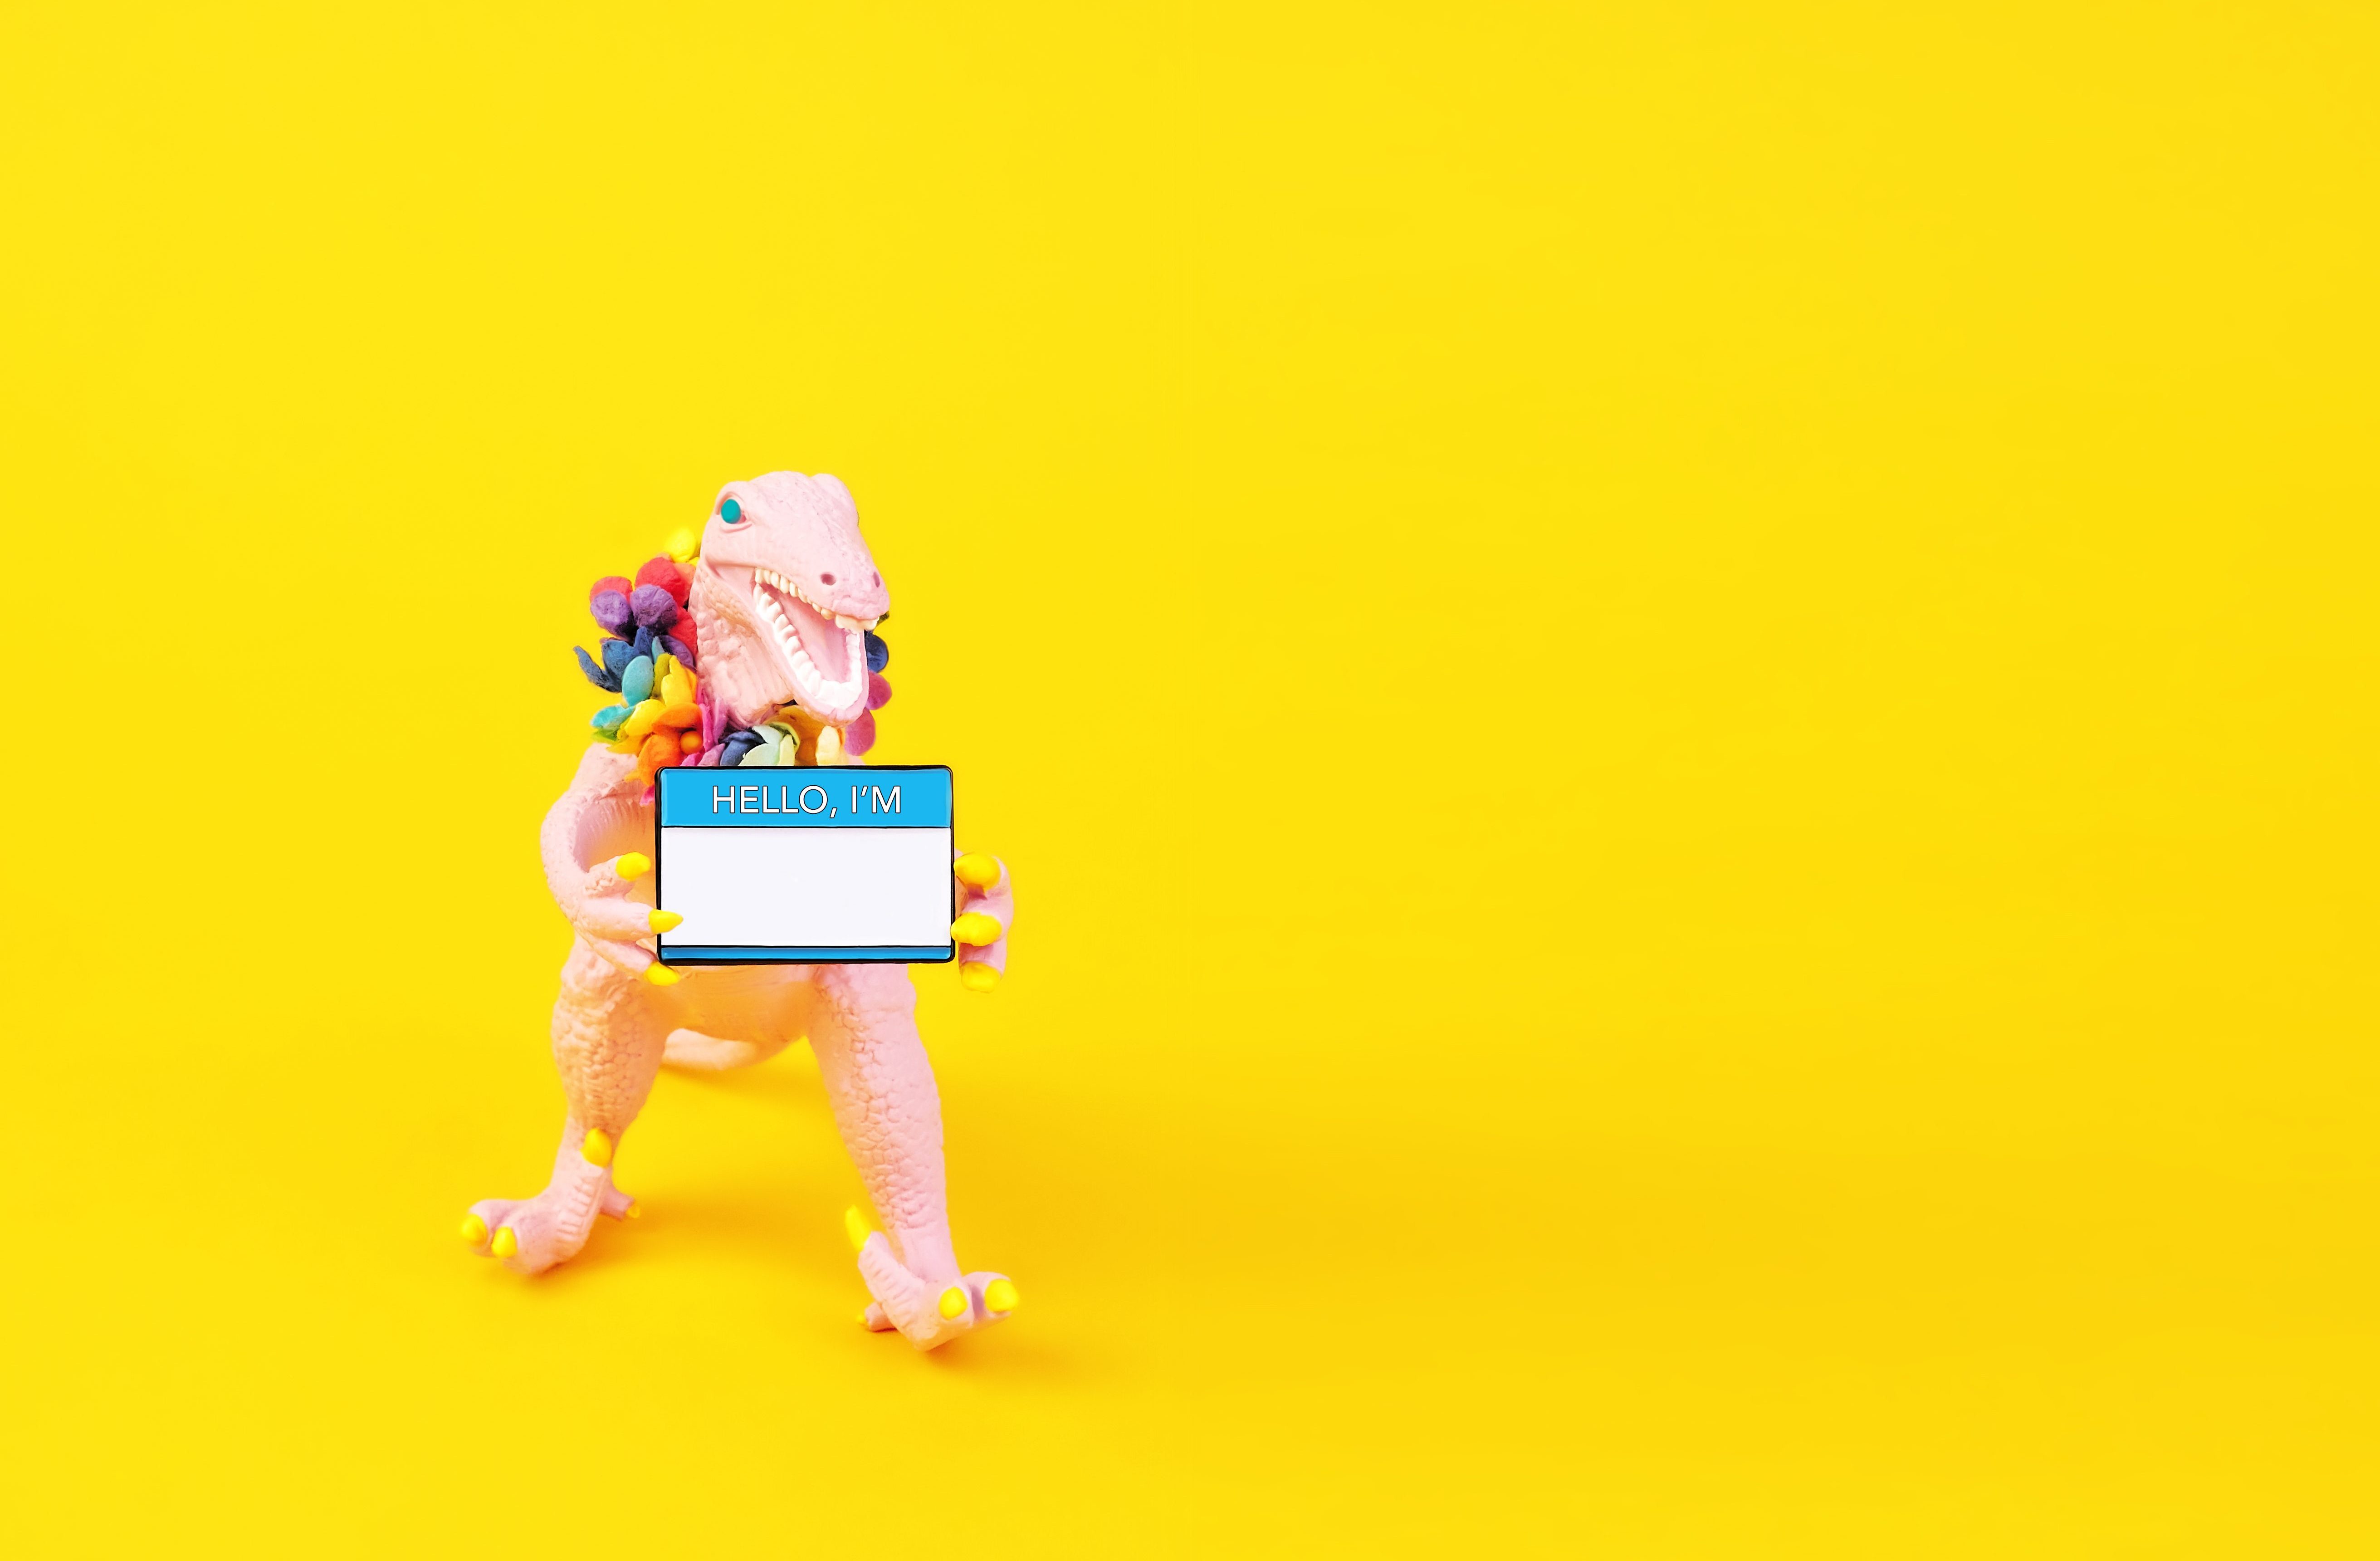 Image of a pink toy dinosaur holding a name tag on a yellow background.